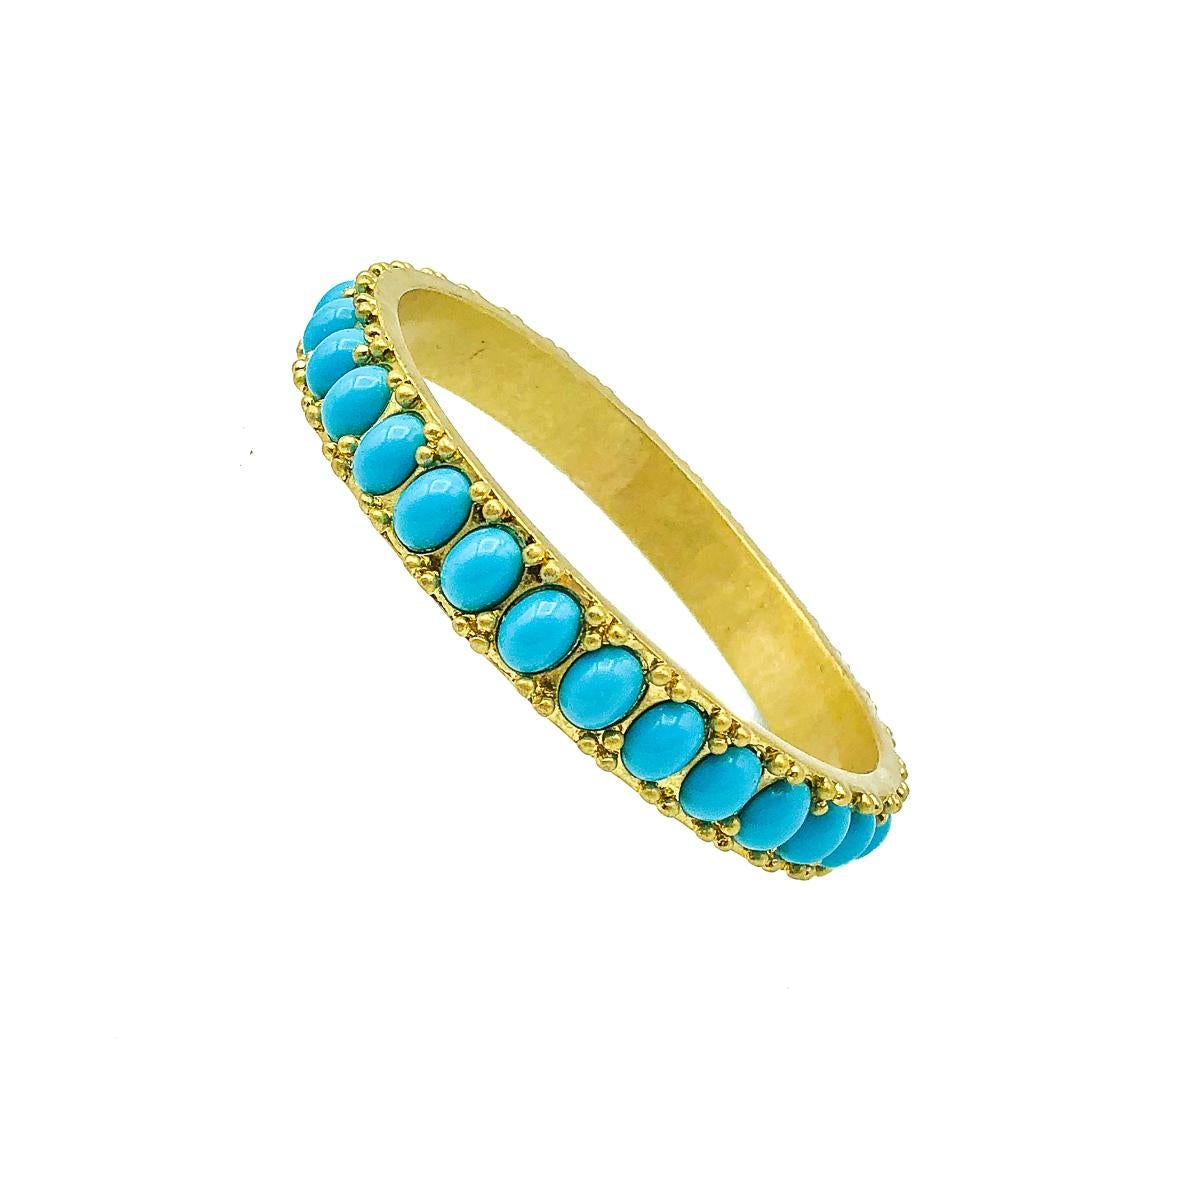 A striking vintage Turquoise Bangle. Crafted in very weighty gold tone metal set with resin cabochon oval turquoise stones. Very good vintage condition, 6.2cms internal diameter. A perfect piece of vibrant arm candy stacked or solo. 

Established in